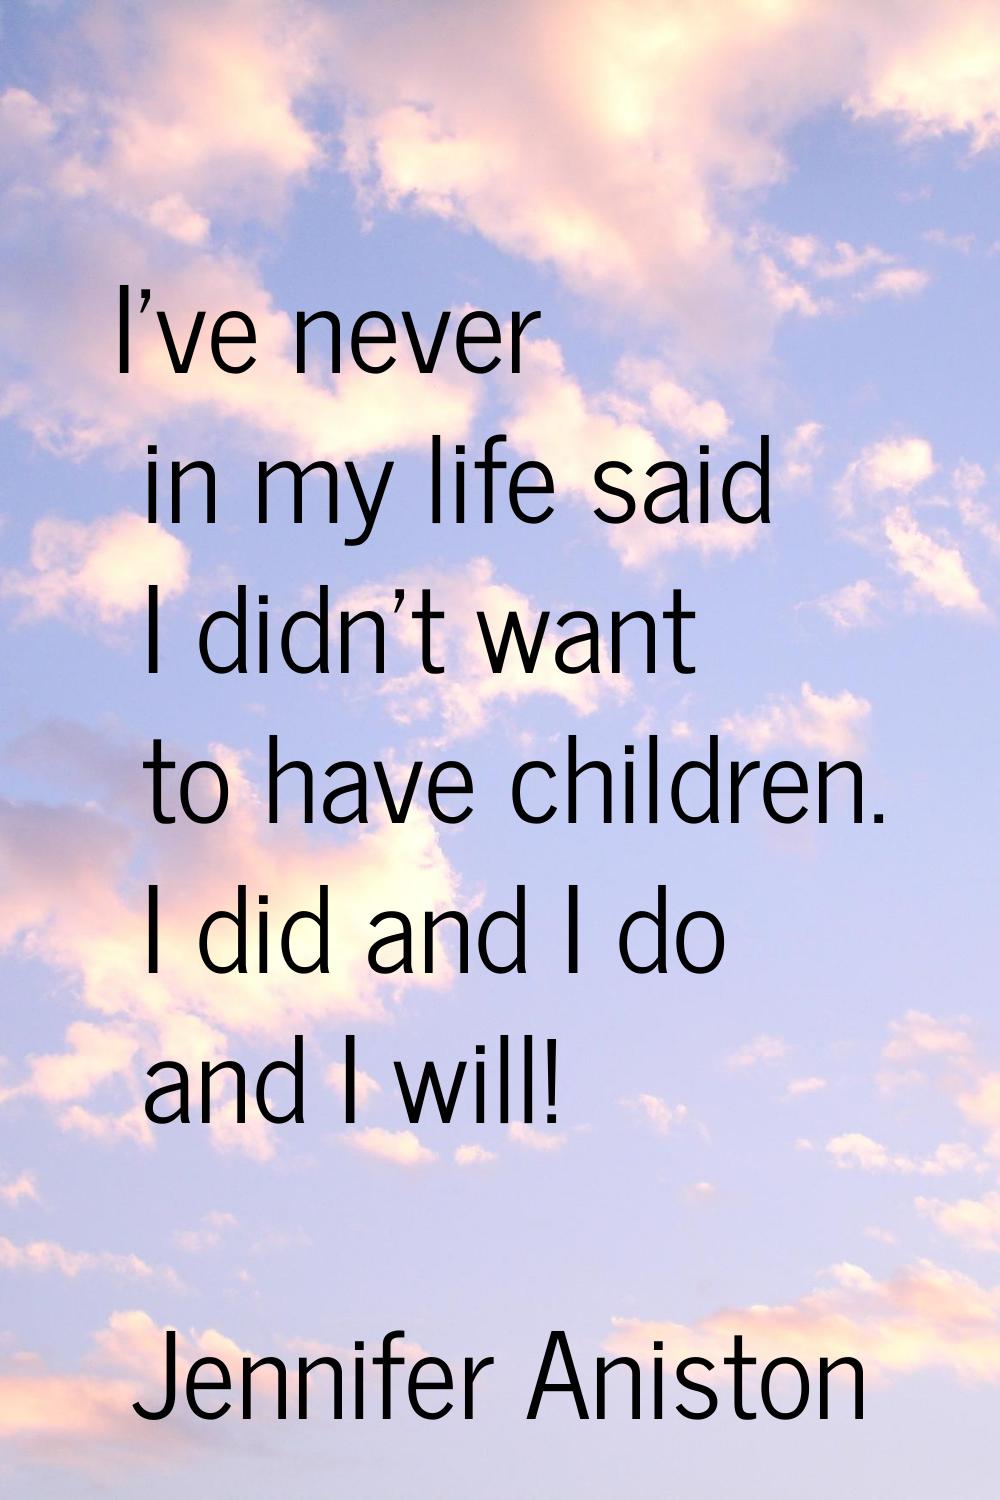 I've never in my life said I didn't want to have children. I did and I do and I will!